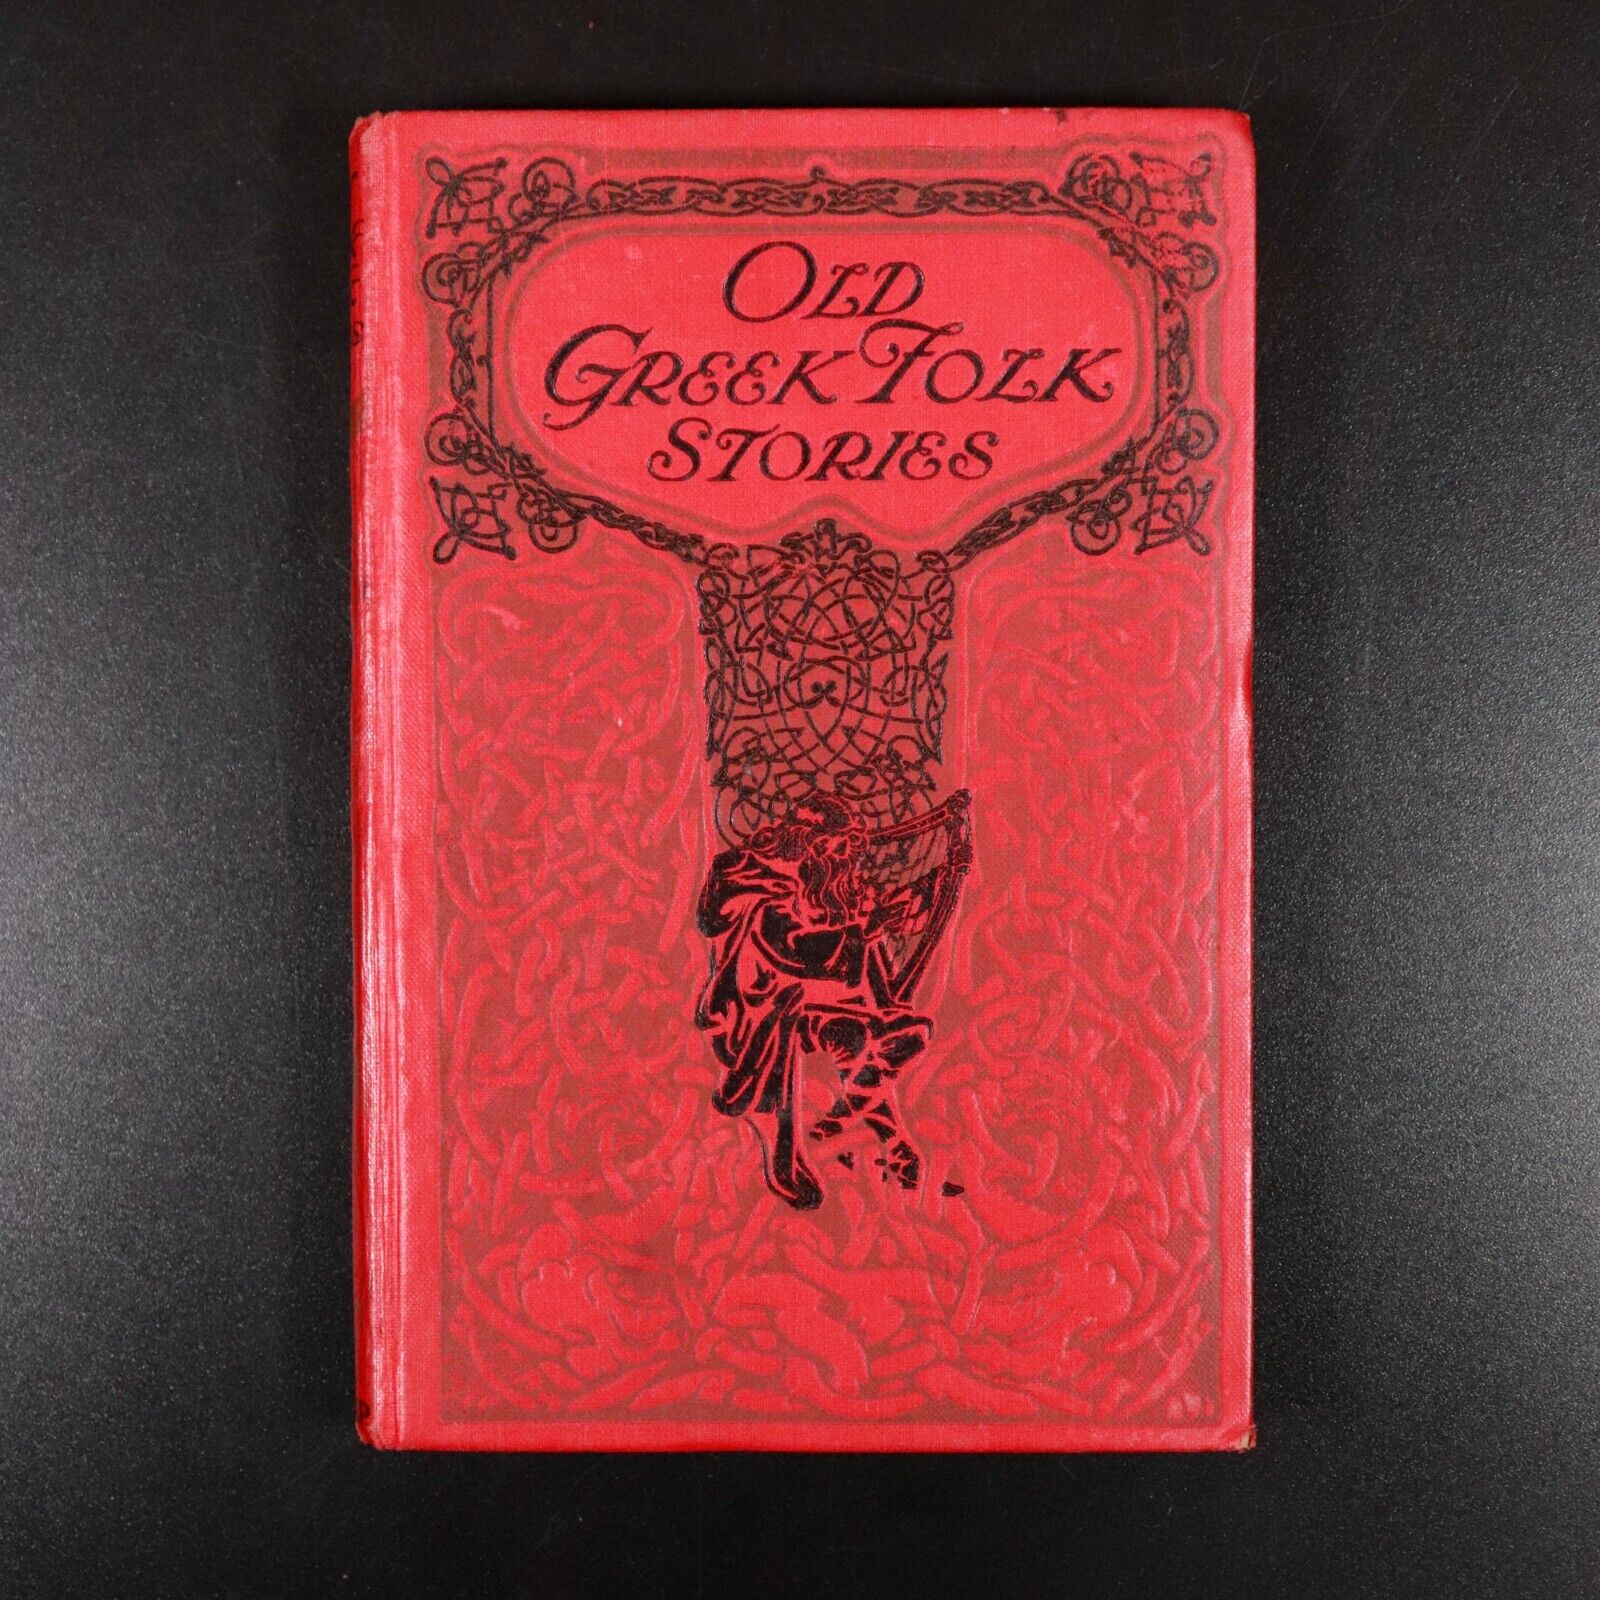 1925 Old Greek Folk Stories Told Anew by Josephine Preston Peabody Antique Book